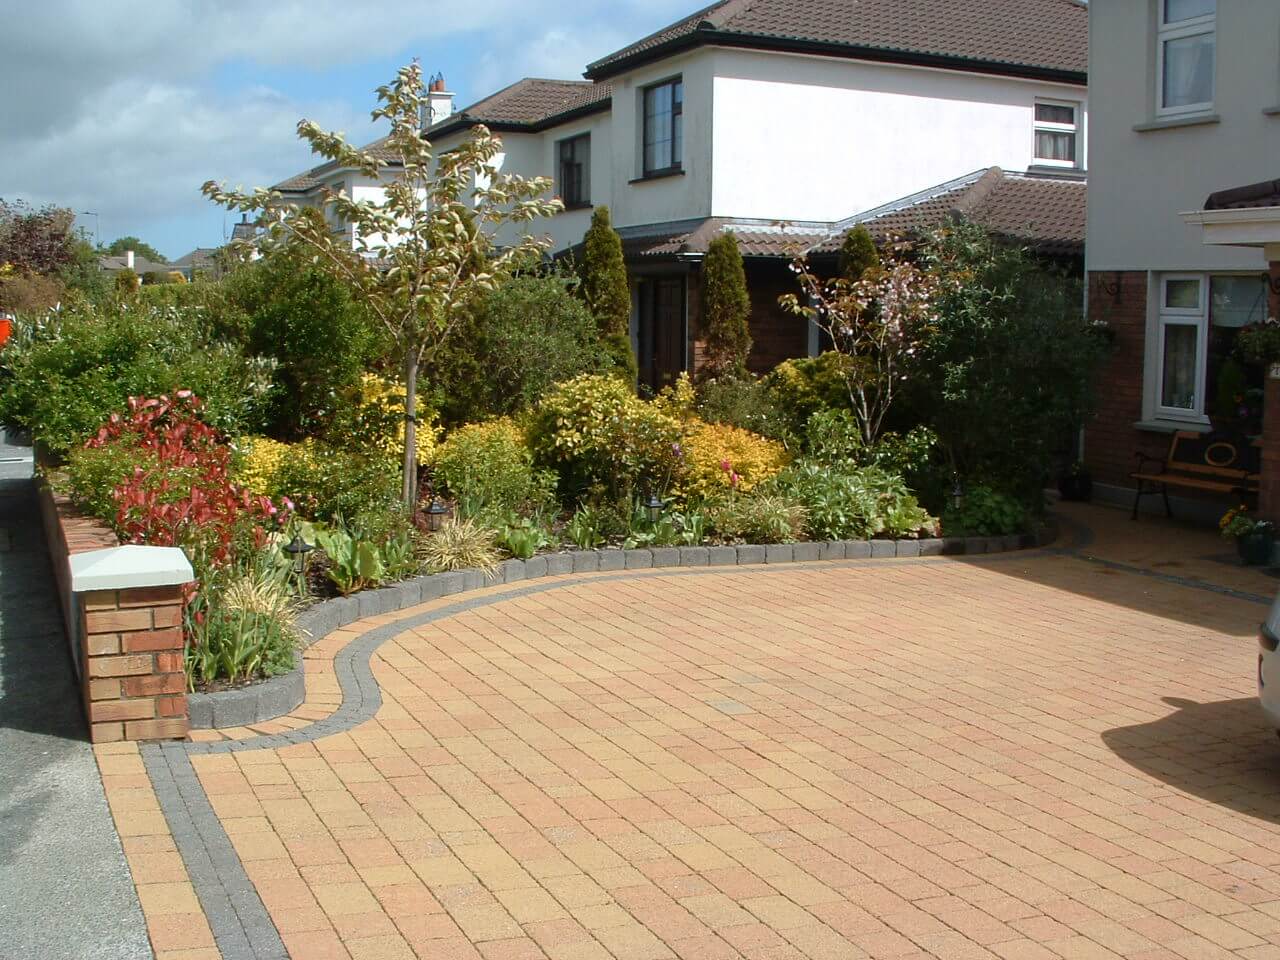 projects - front garden borders and paving